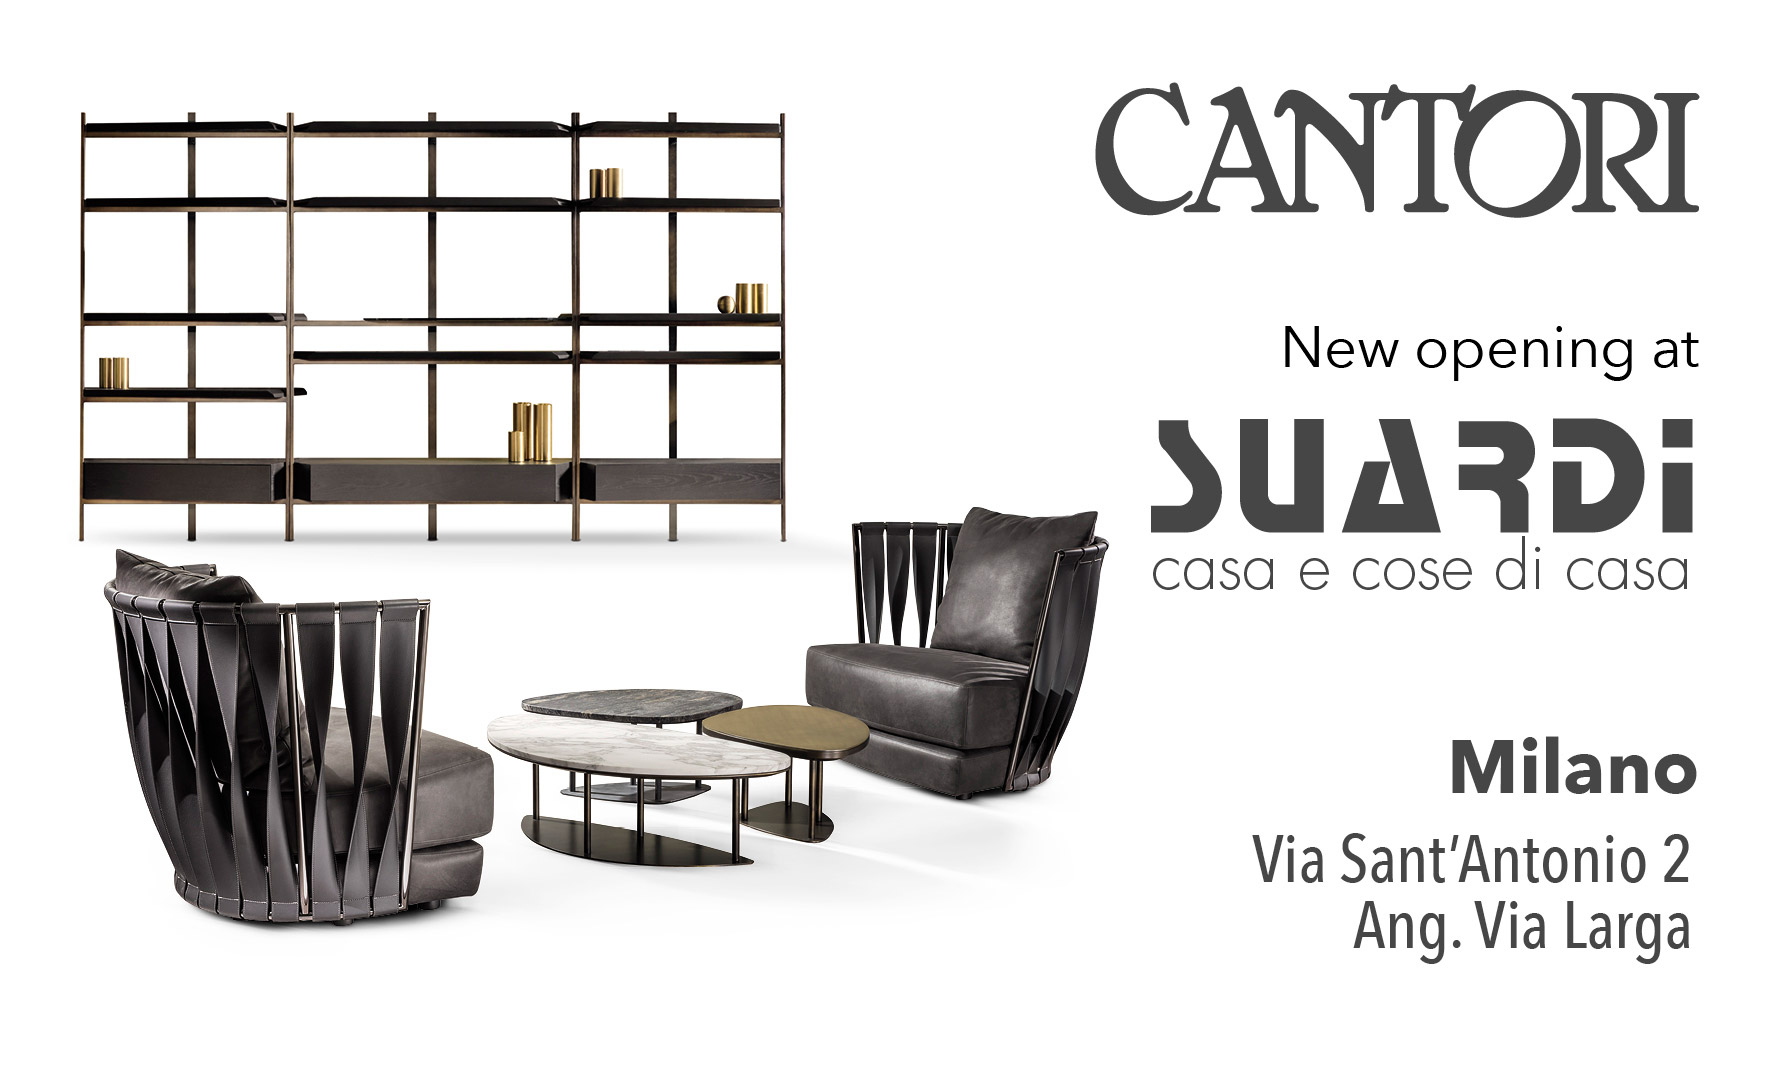 A new Milanese storefront for Cantori - Cantori